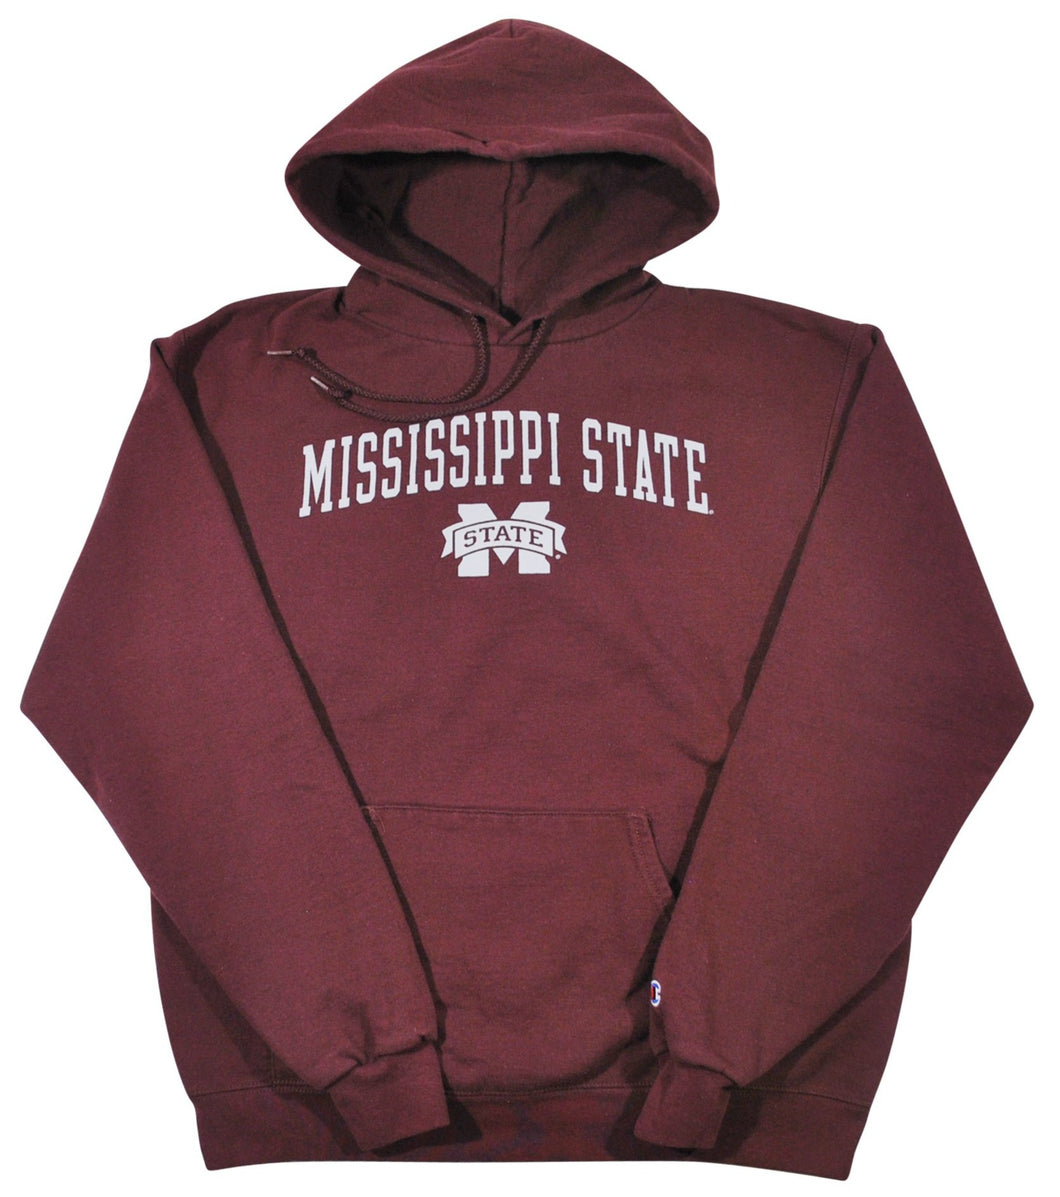 Vintage Mississippi State Bulldogs Sweatshirt Size Small